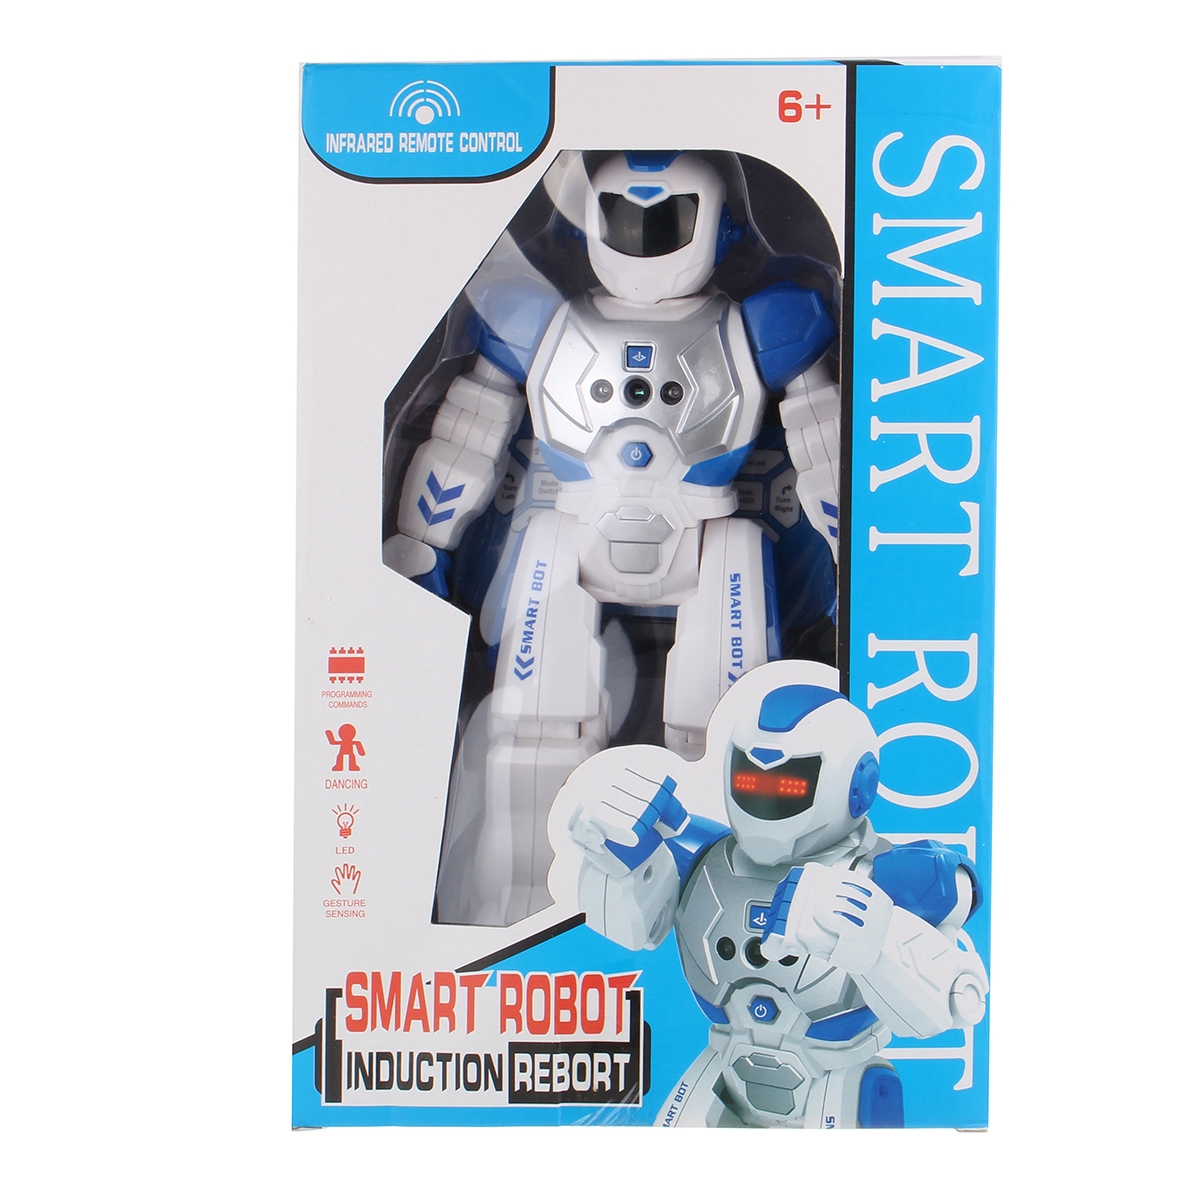 JOYIN Remote Control Intelligent Robot Toy with Infrared Controller Gesture 